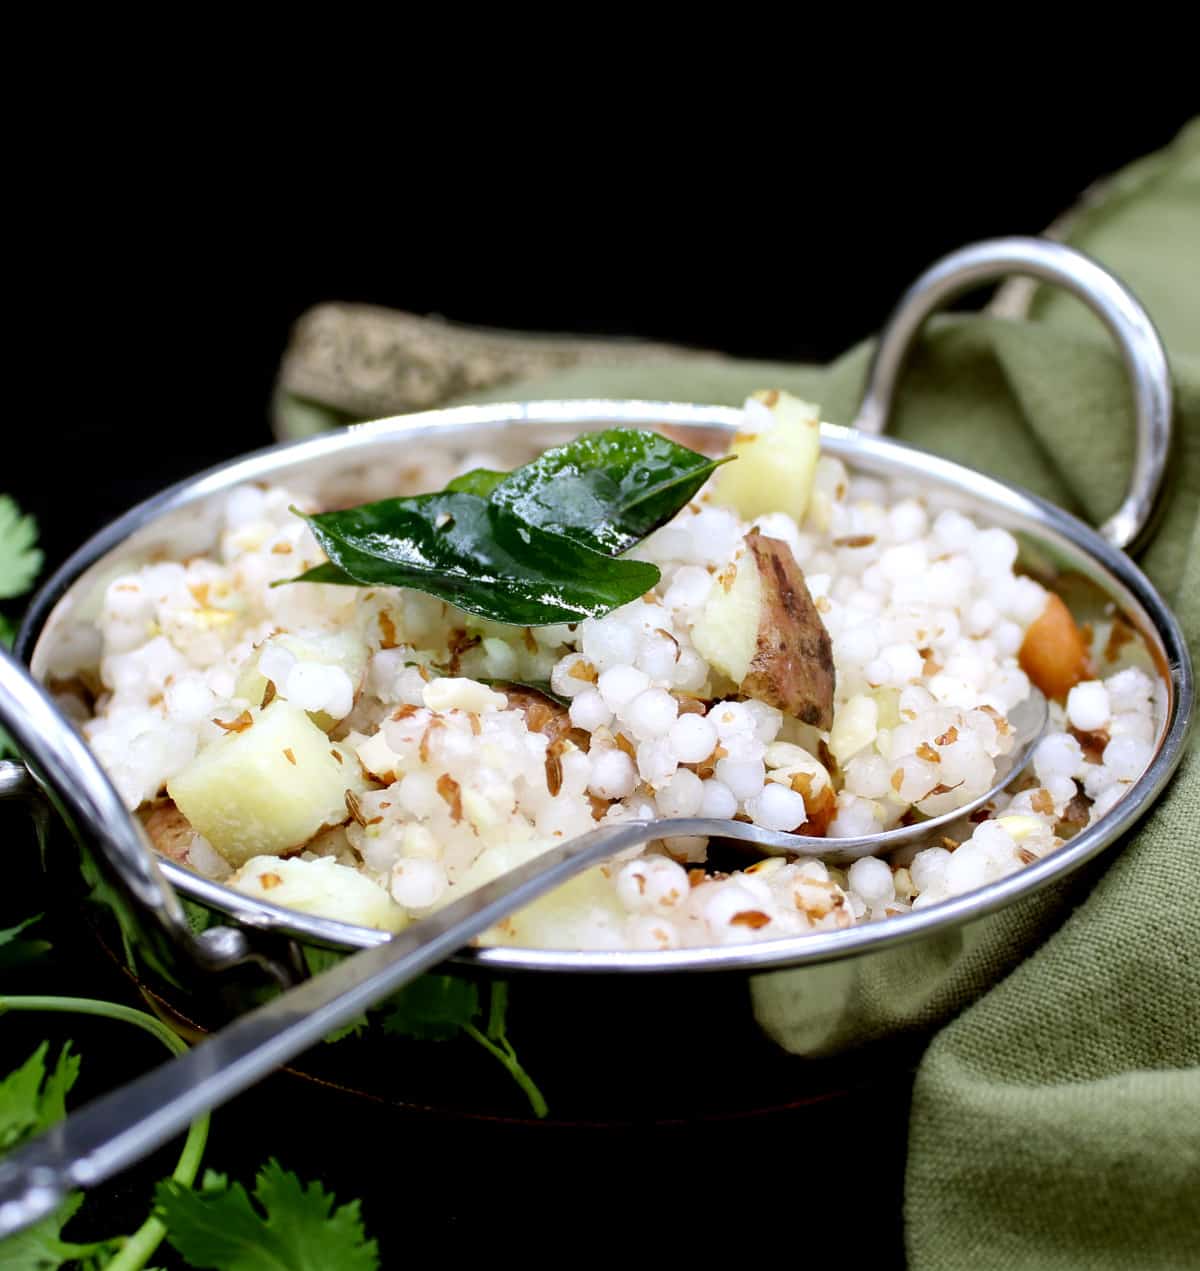 A steel wok or kadhai with sabudana khichdi, made with tapioca pearls, with a garnish of curry leaves, peanuts, potatoes and with cilantro leaves scattered around. Next to the wok is a green and gold napkin on a black background.